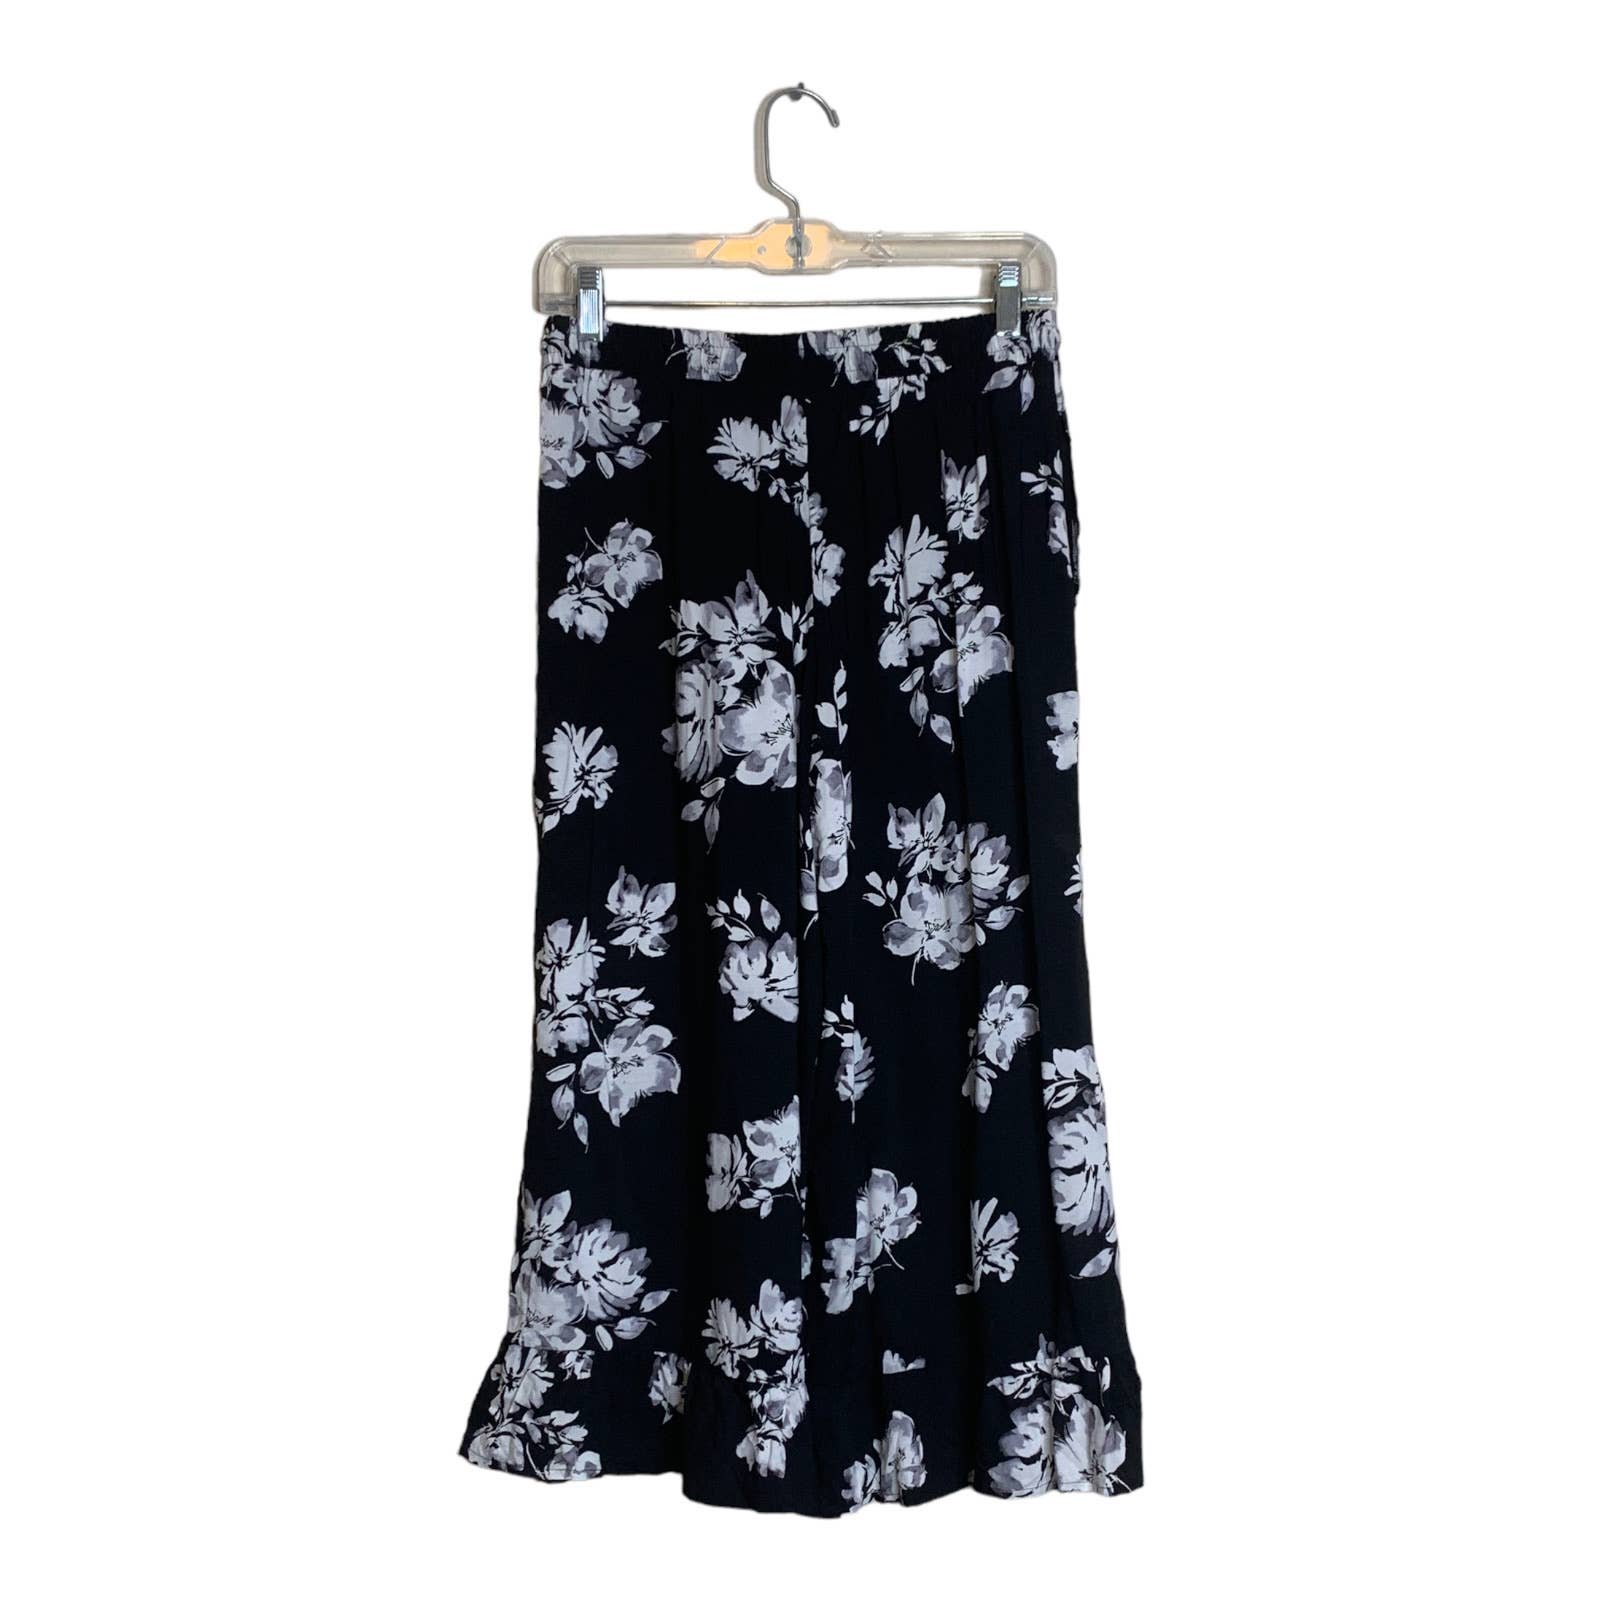 Latest  Vera Wang black sheer floral cropped ruffled hems pull on pants size small IN22dghKb Outlet Store